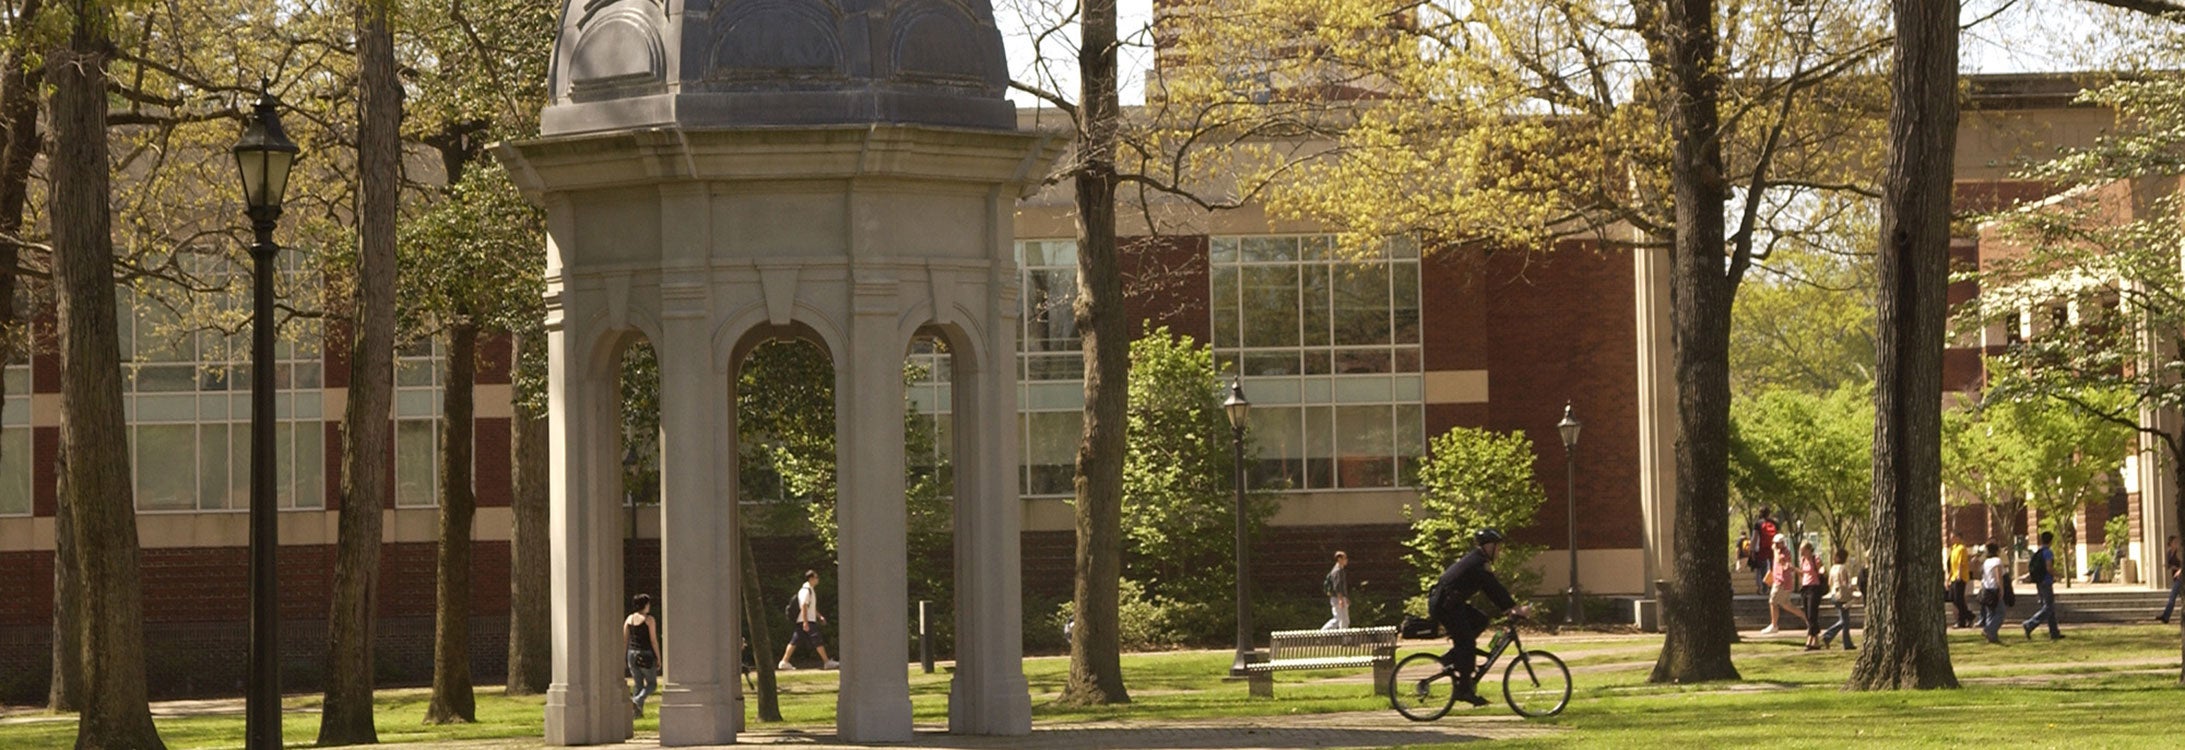 Image of student riding a bike past the cupola